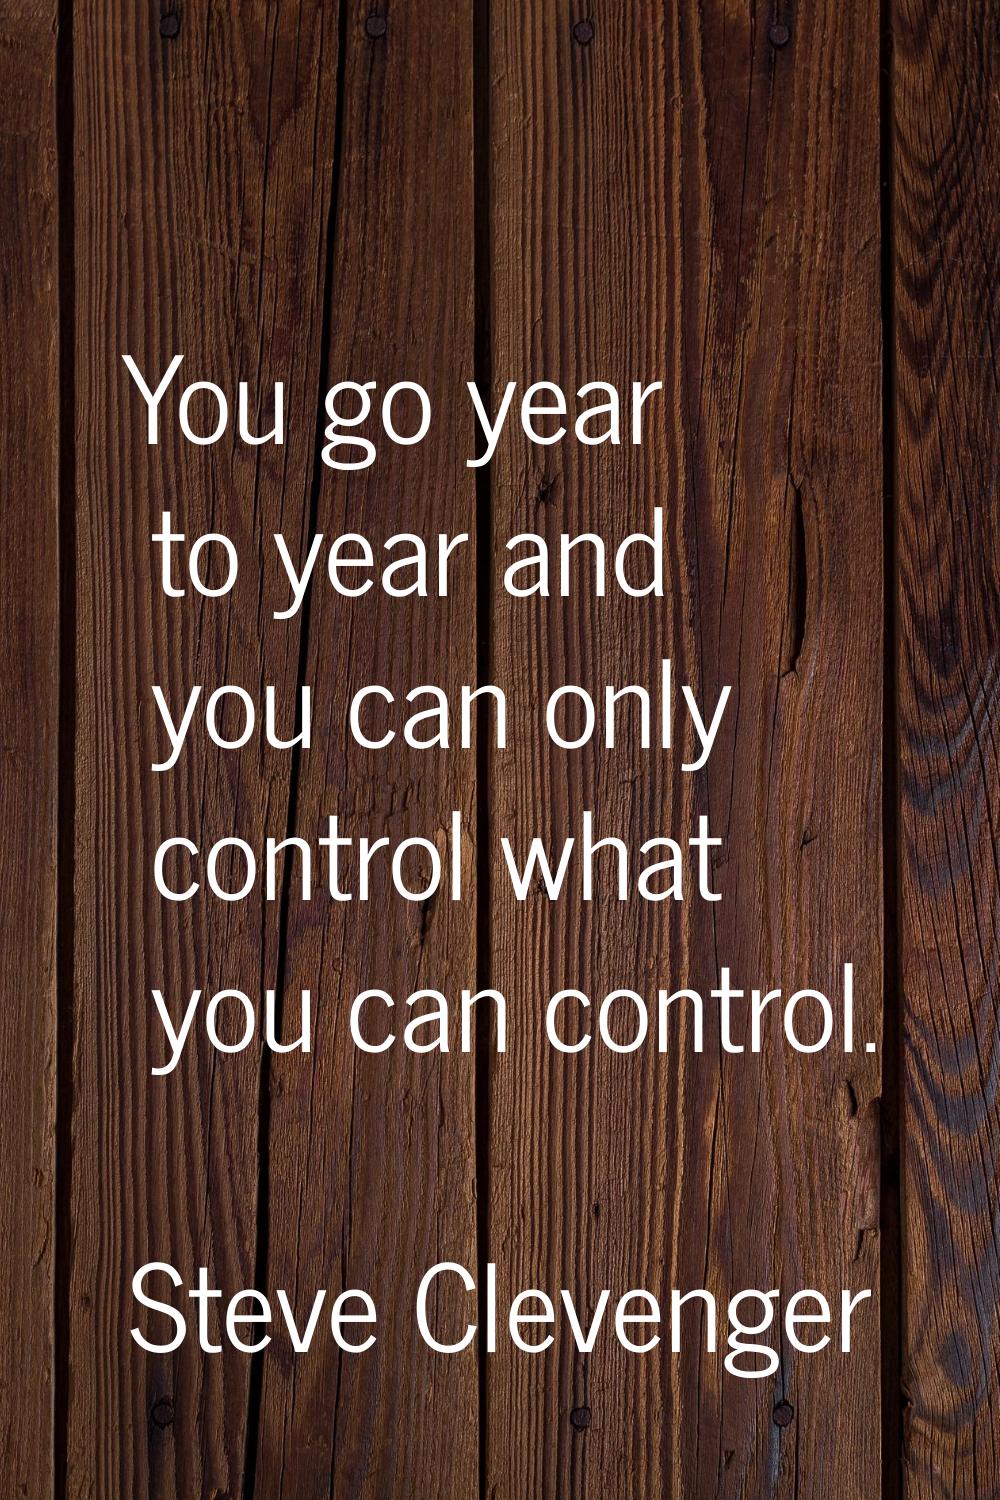 You go year to year and you can only control what you can control.